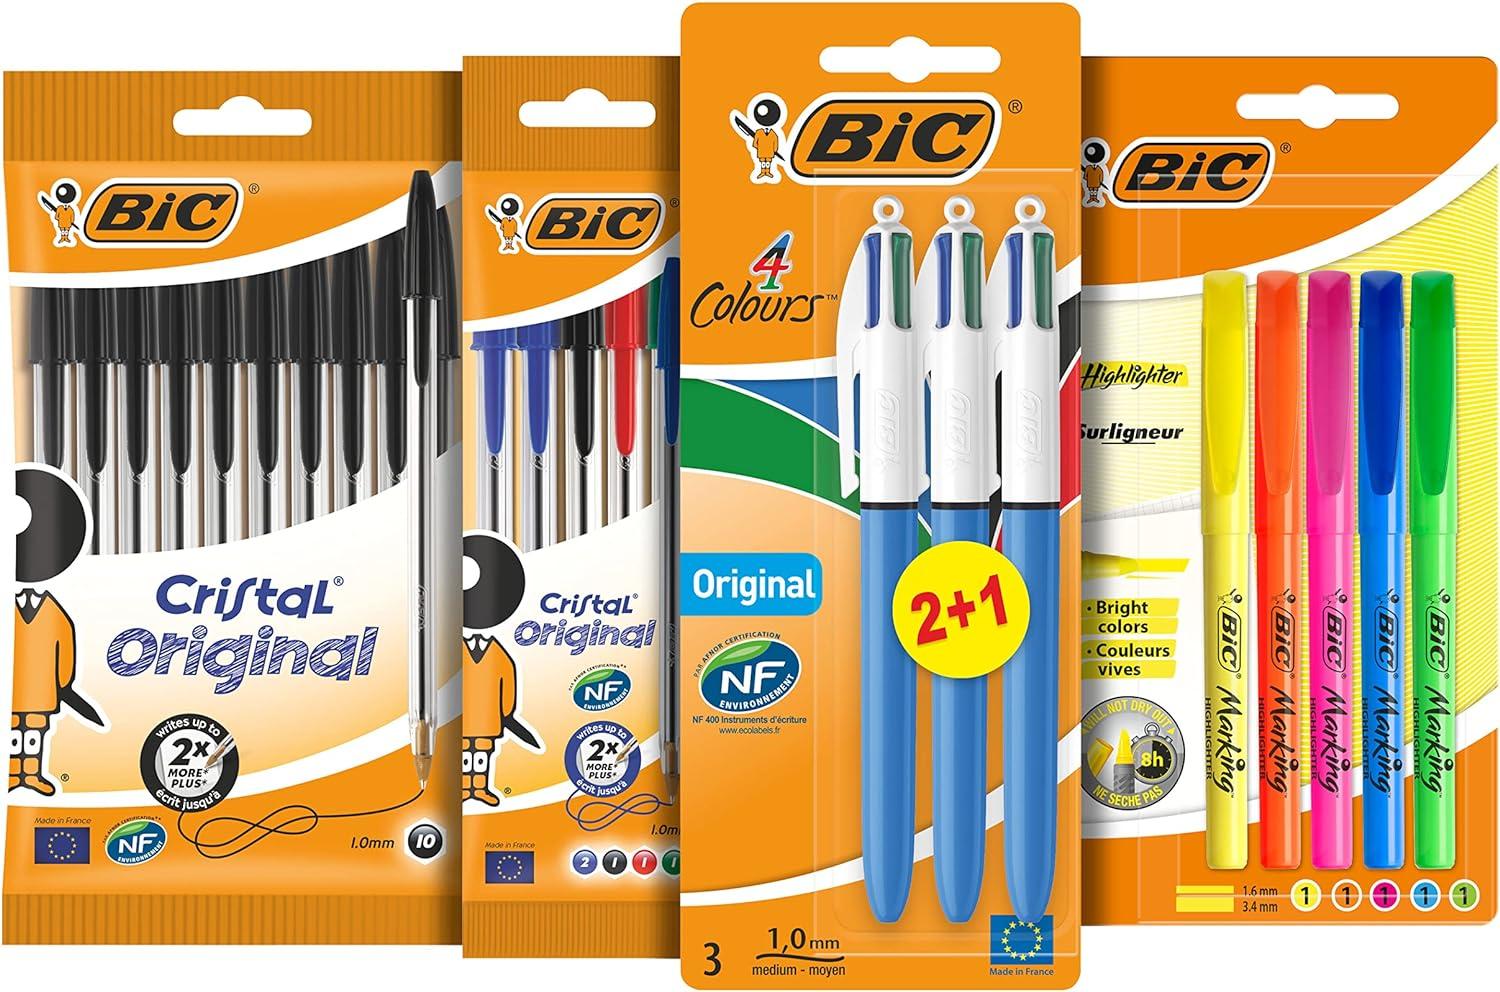 bic ballpoint pens colouring pens 4 colour pens highlighters and black pens perfect for school and office use